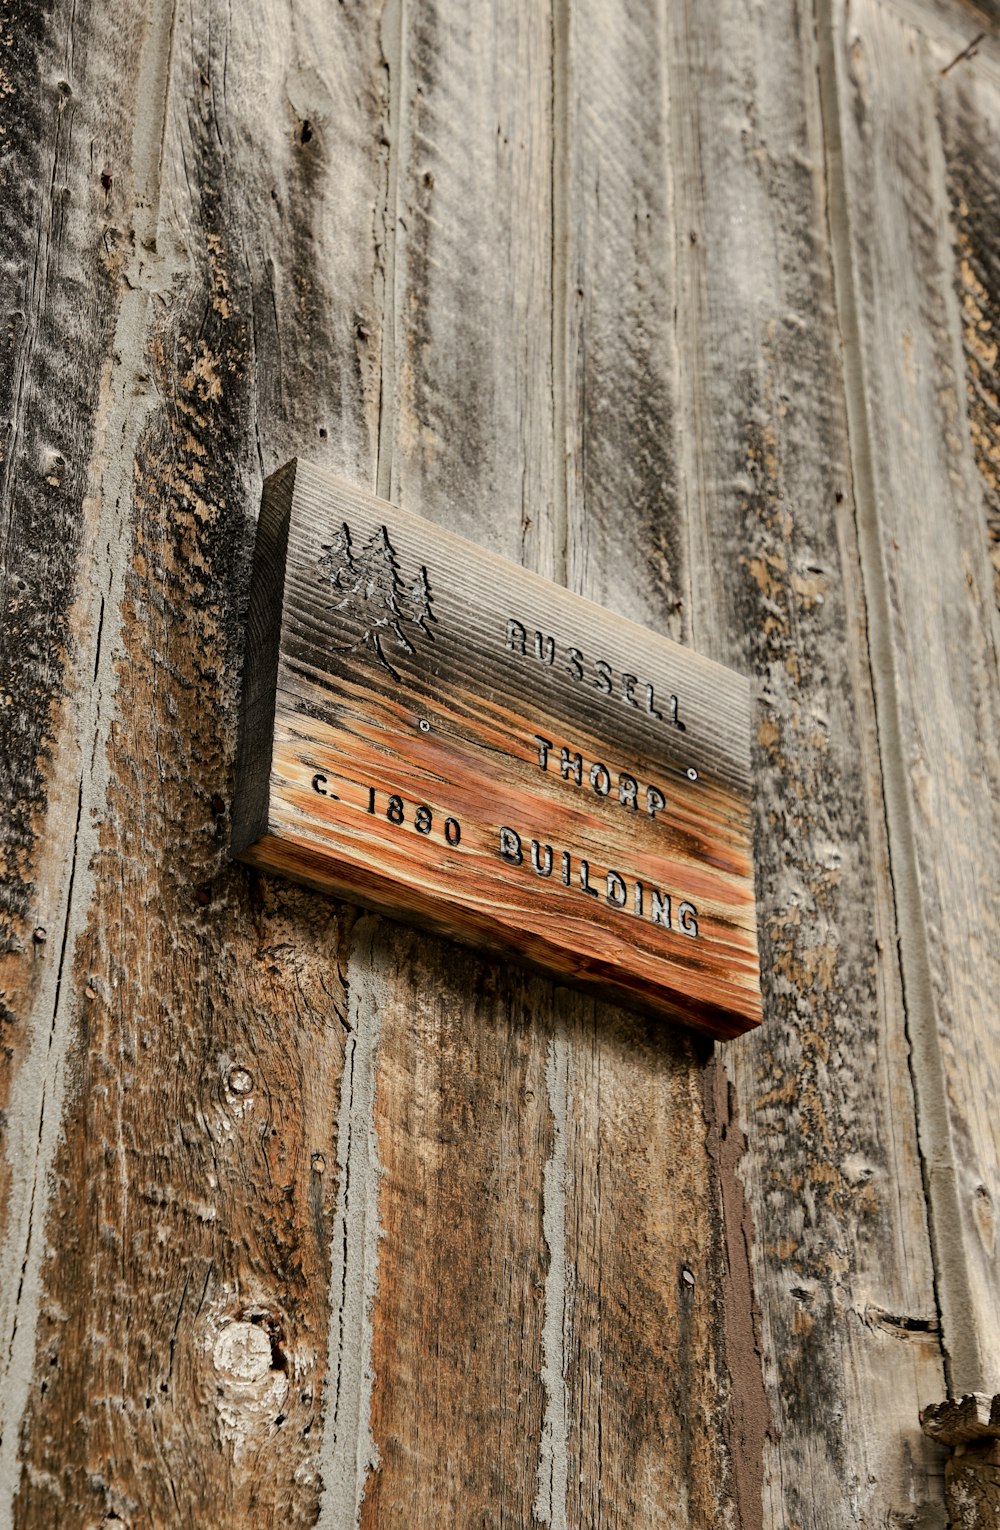 a wooden sign on the side of a building